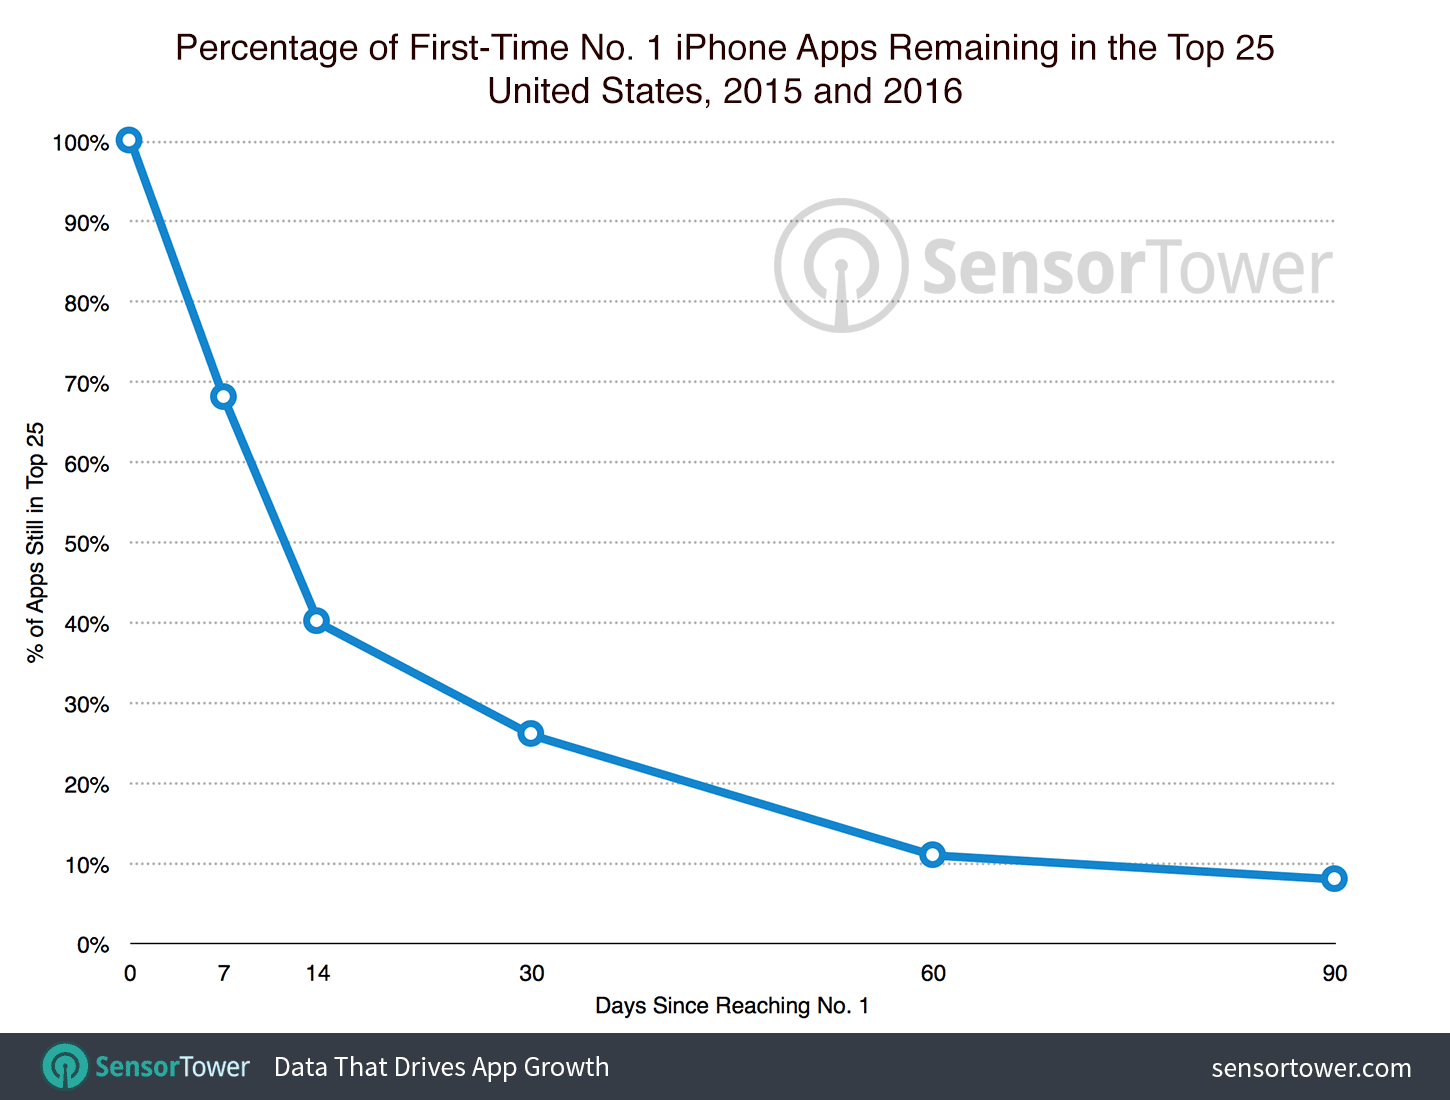 Percentage of No. 1 iPhone apps that remain in the top 25 over time